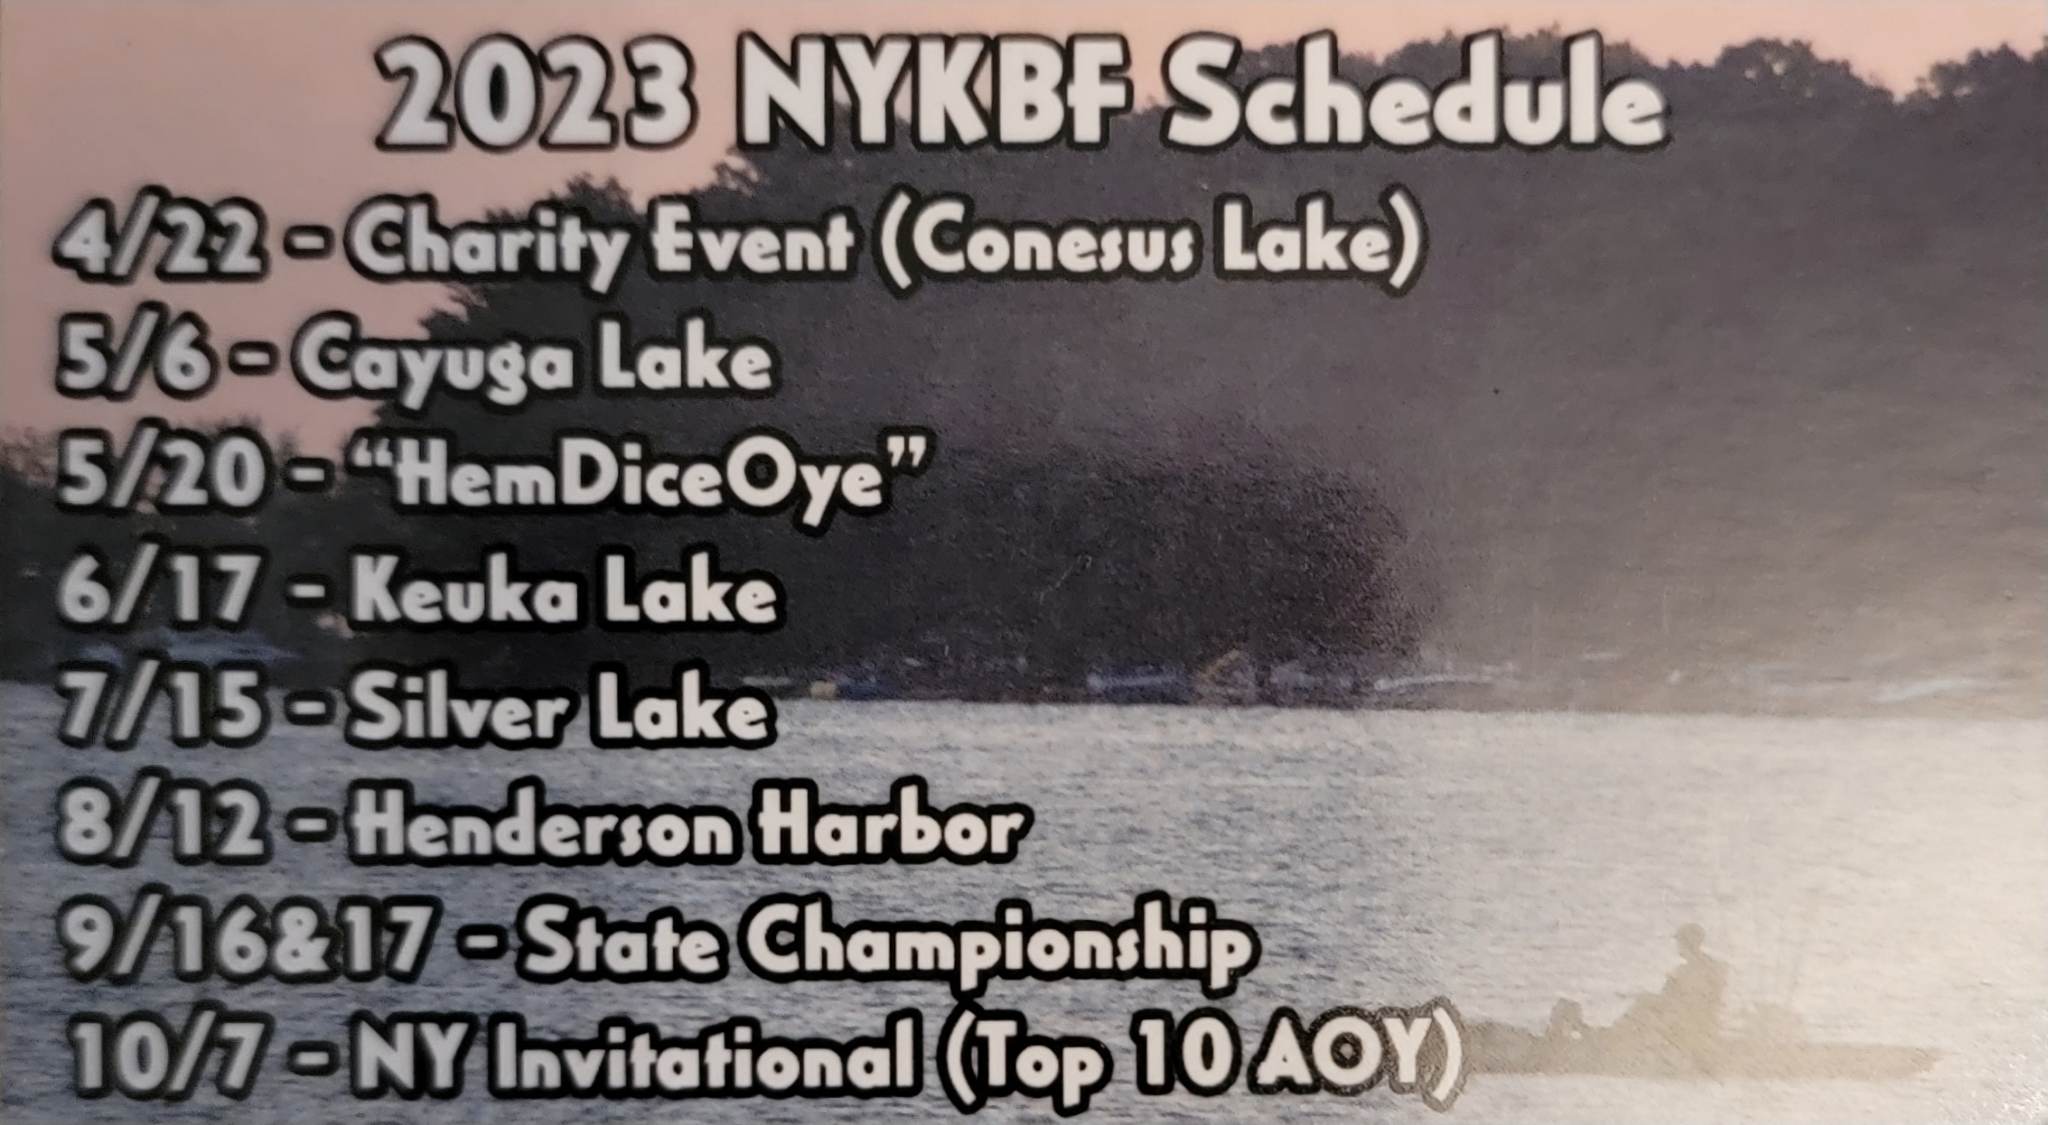 The 2023 schedule for NYKBF